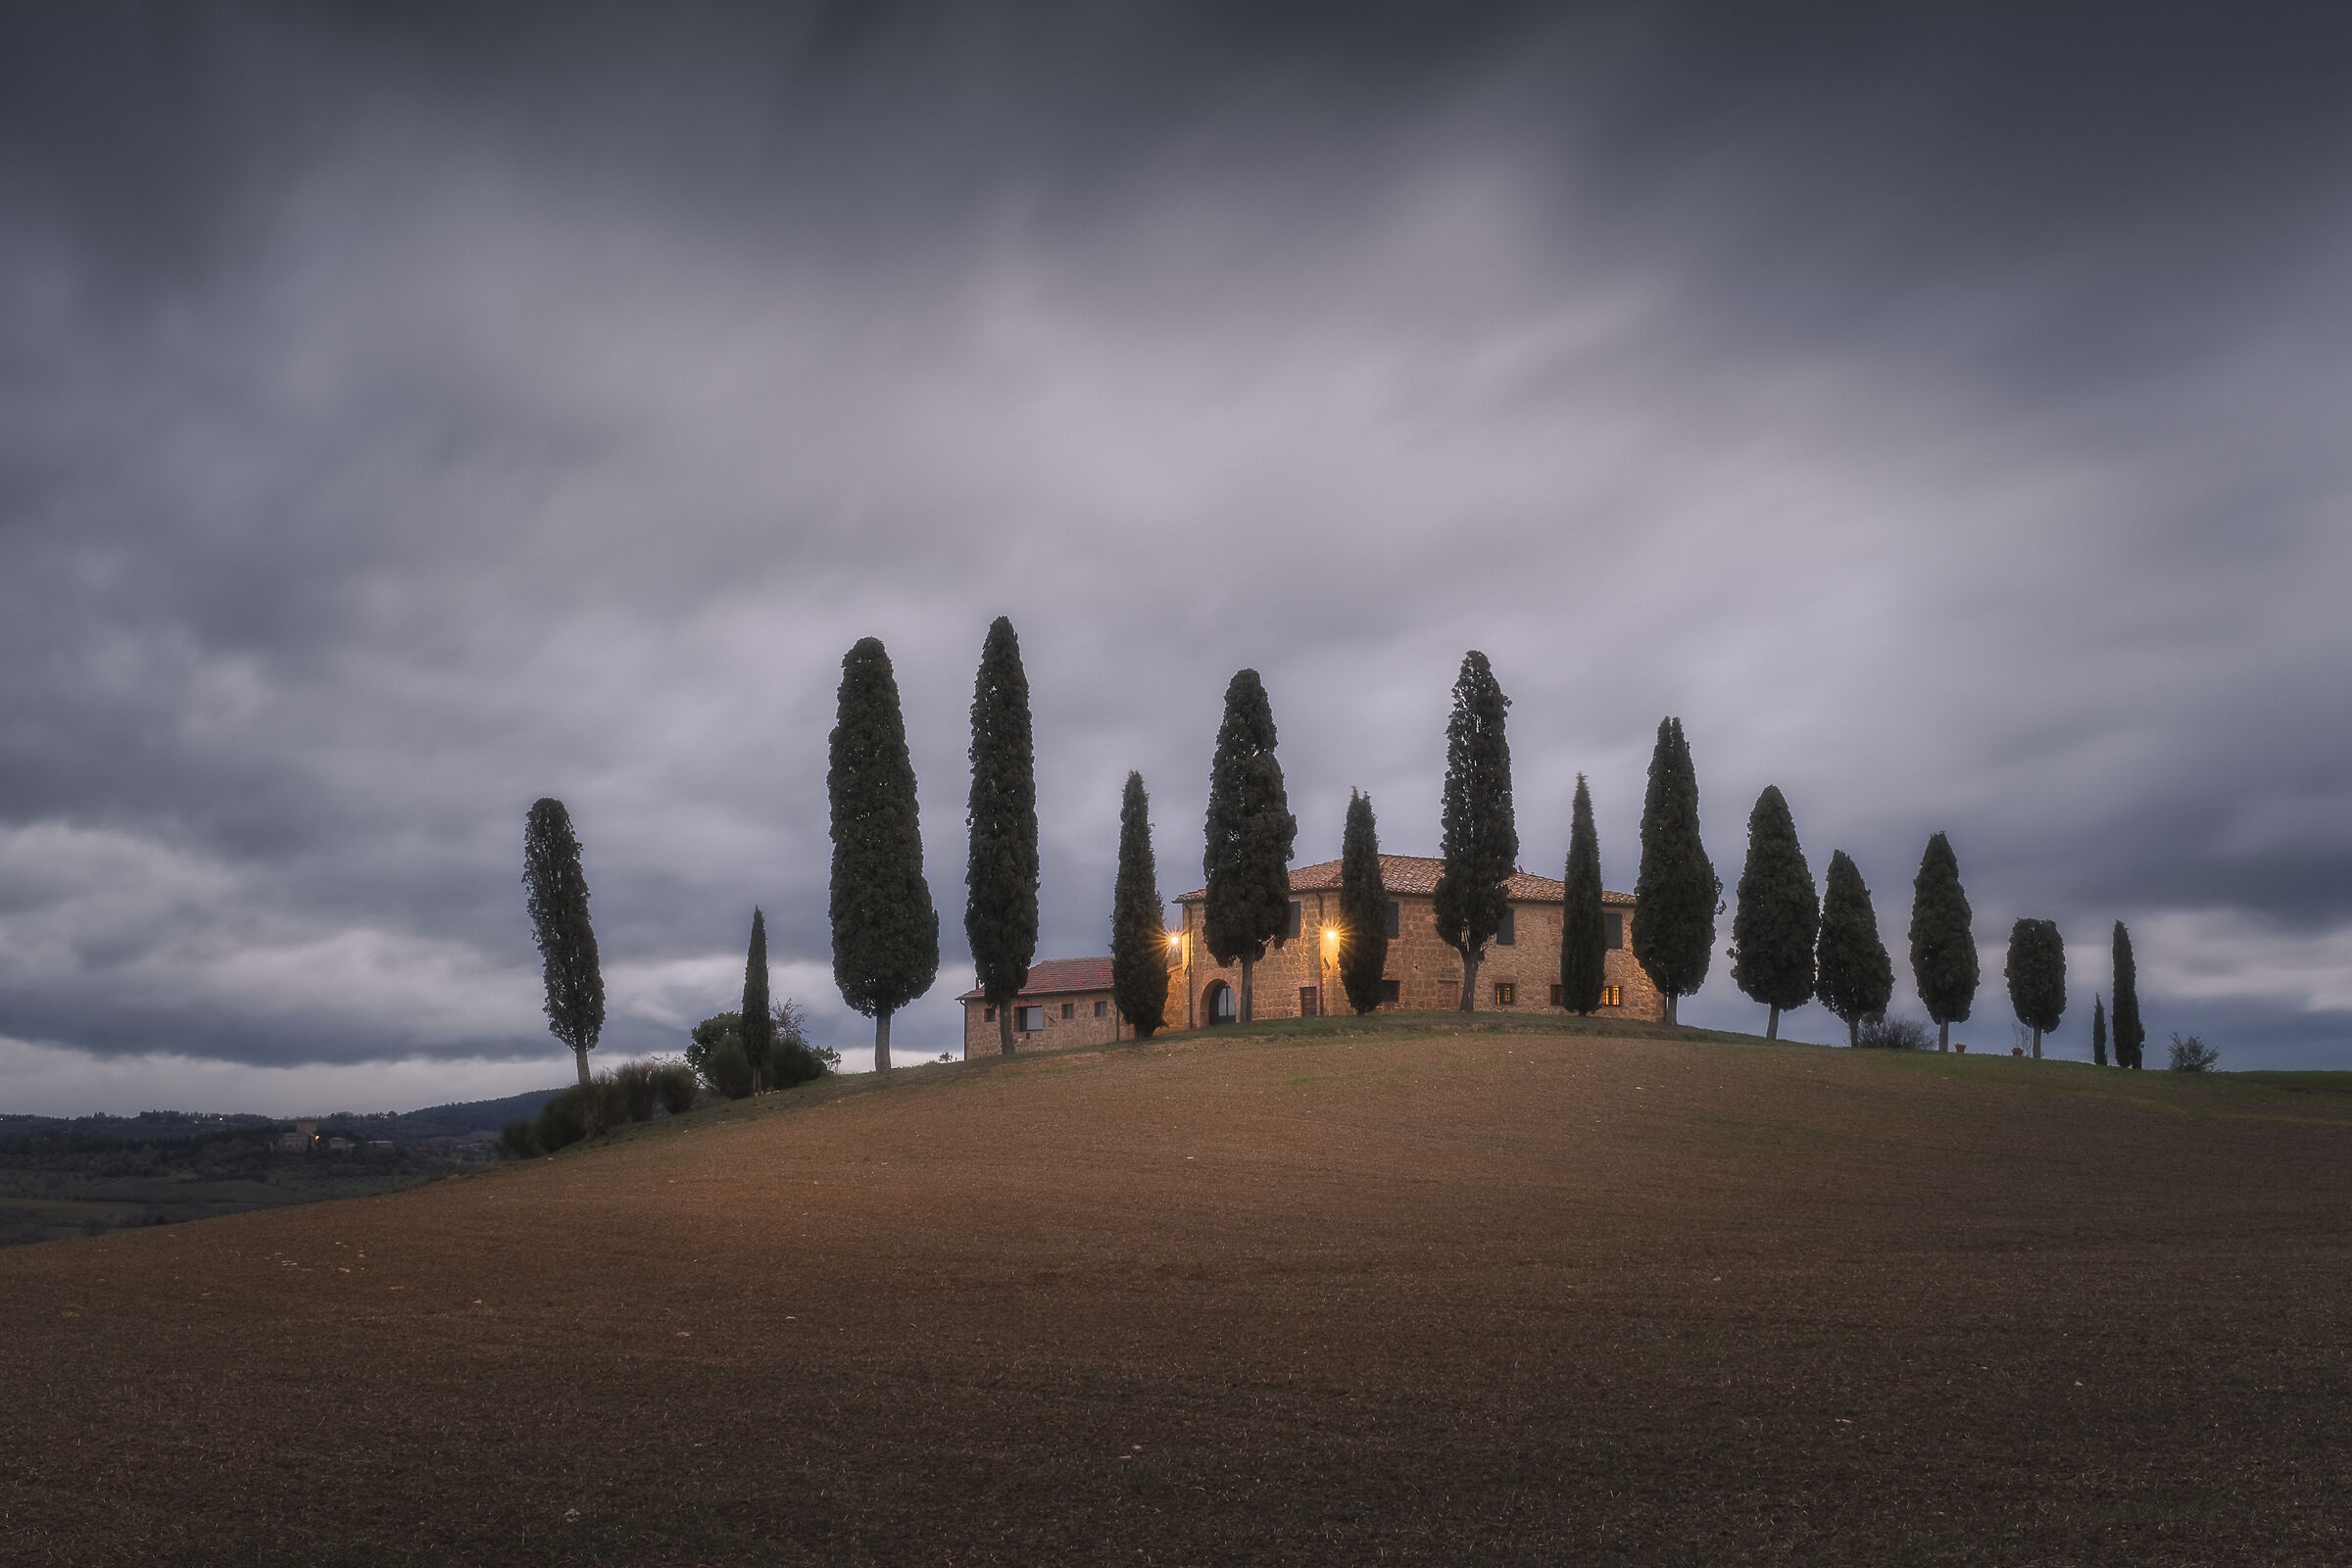 The cypresses...